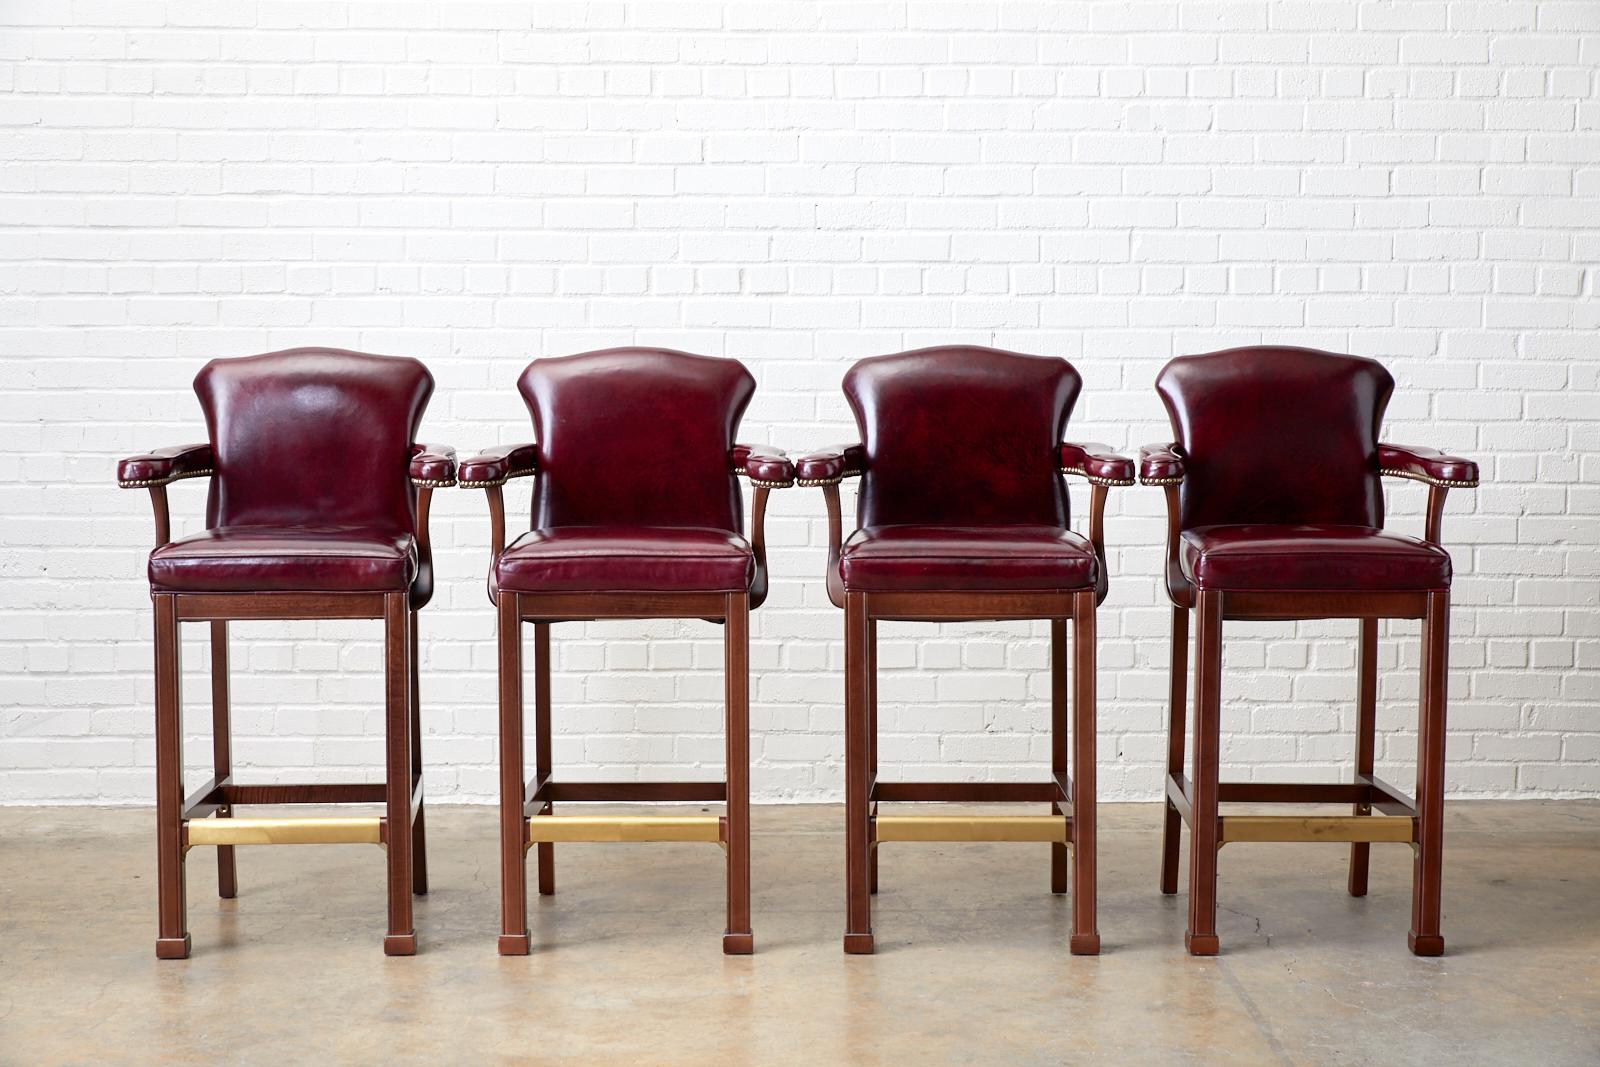 Grand set of four mahogany bar or kitchen counter stools featuring a cordovan leather hide upholstery. Bespoke set of American chairs from Hickory, North Carolina constructed with wide serpentine arms and a shaped back crest in the English Regency